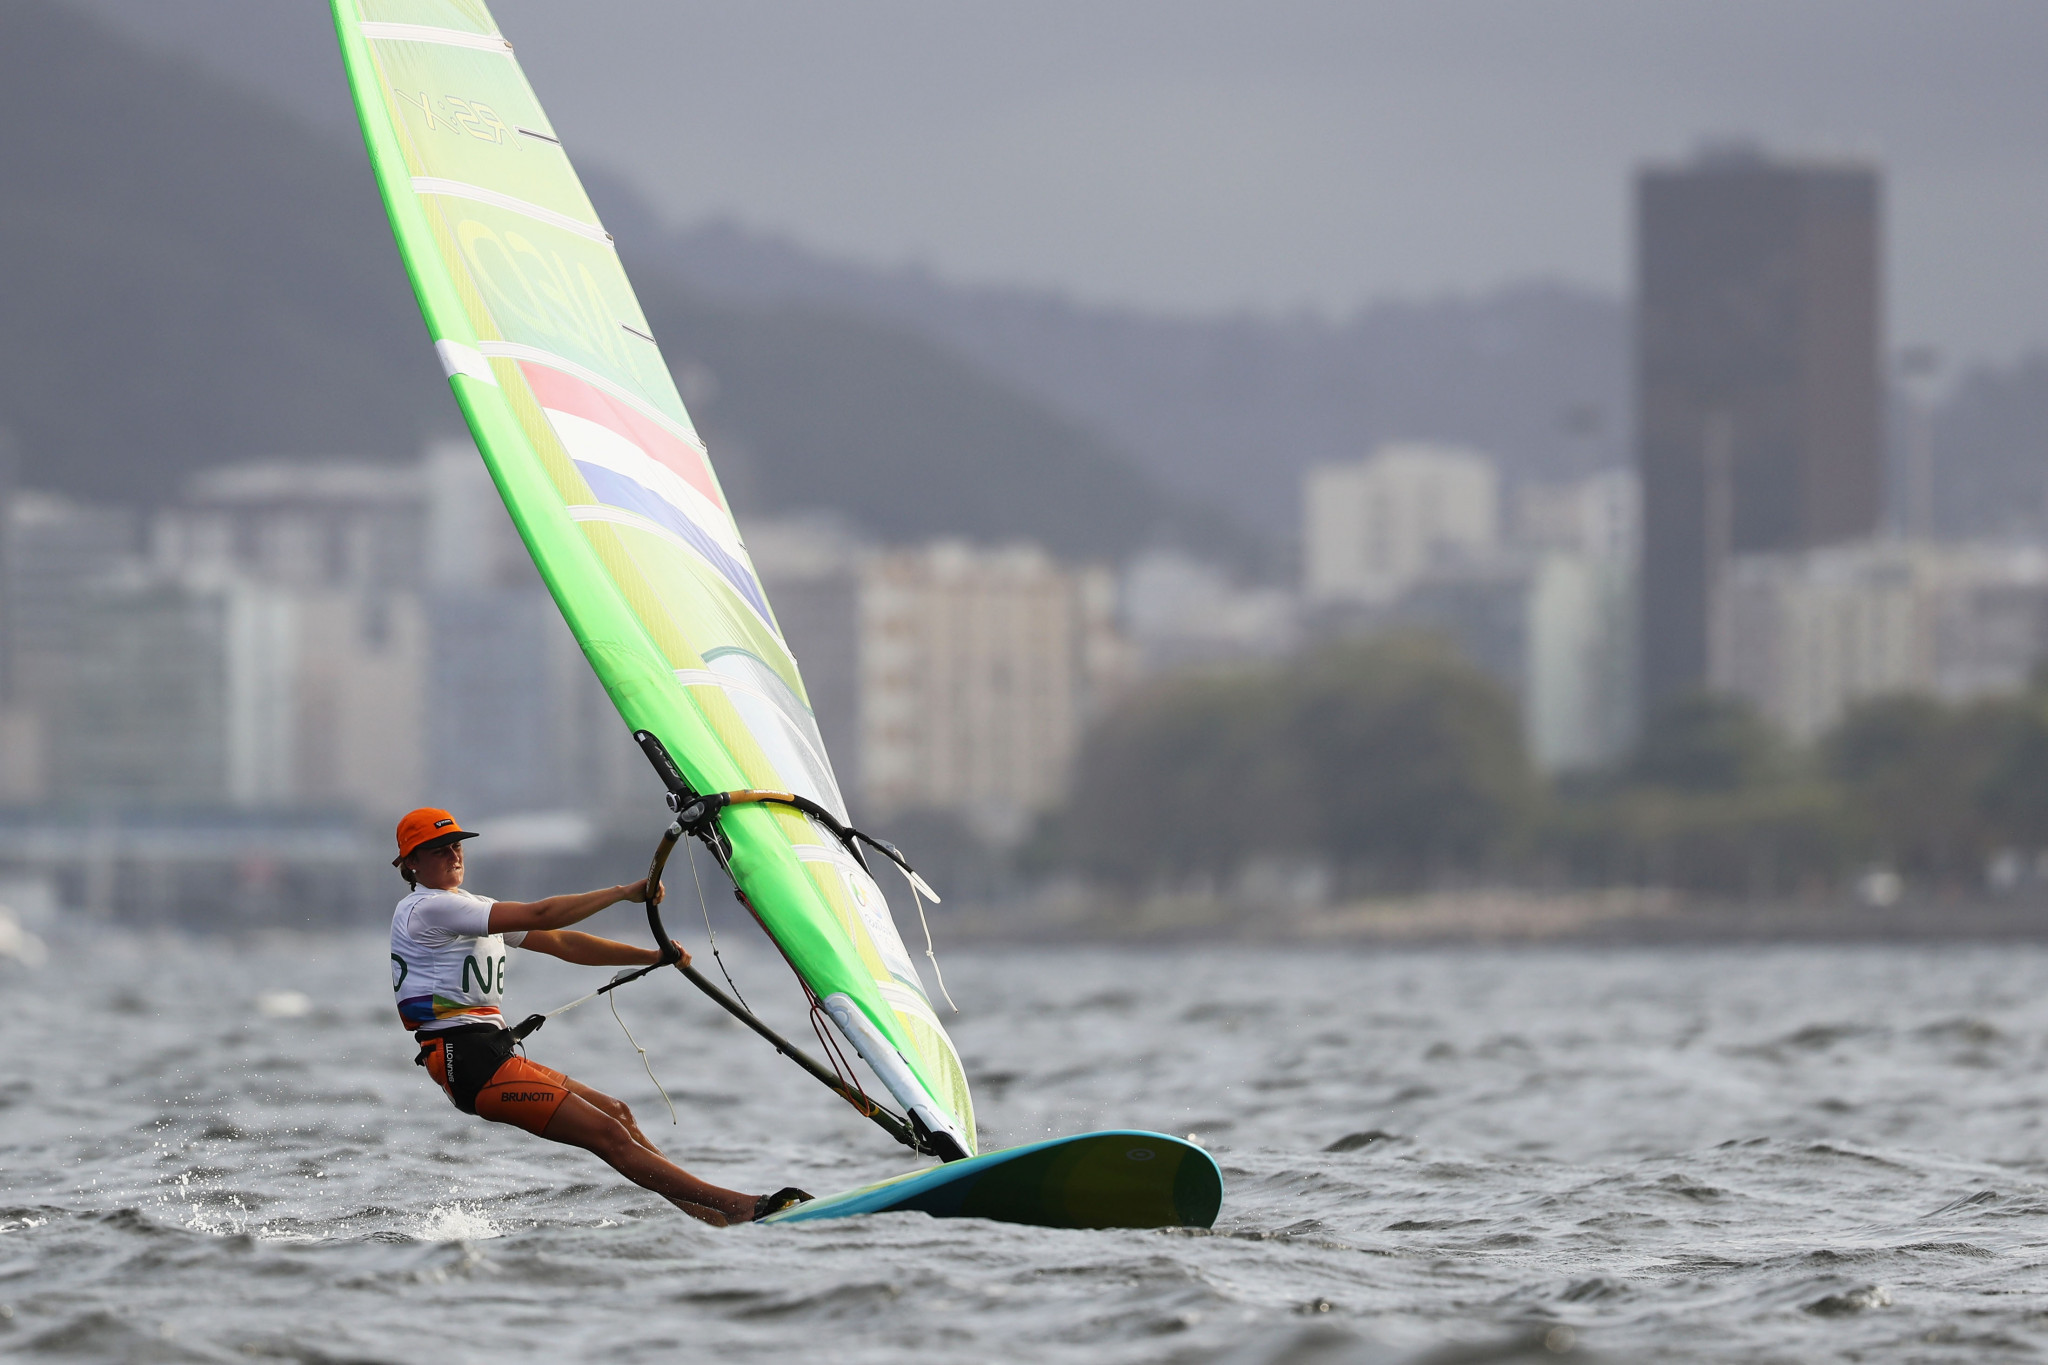 The Netherlands' Lilian de Geus maintained her overall lead on a tough day for the women at the RS:X World Championships in Torbole ©Getty Images